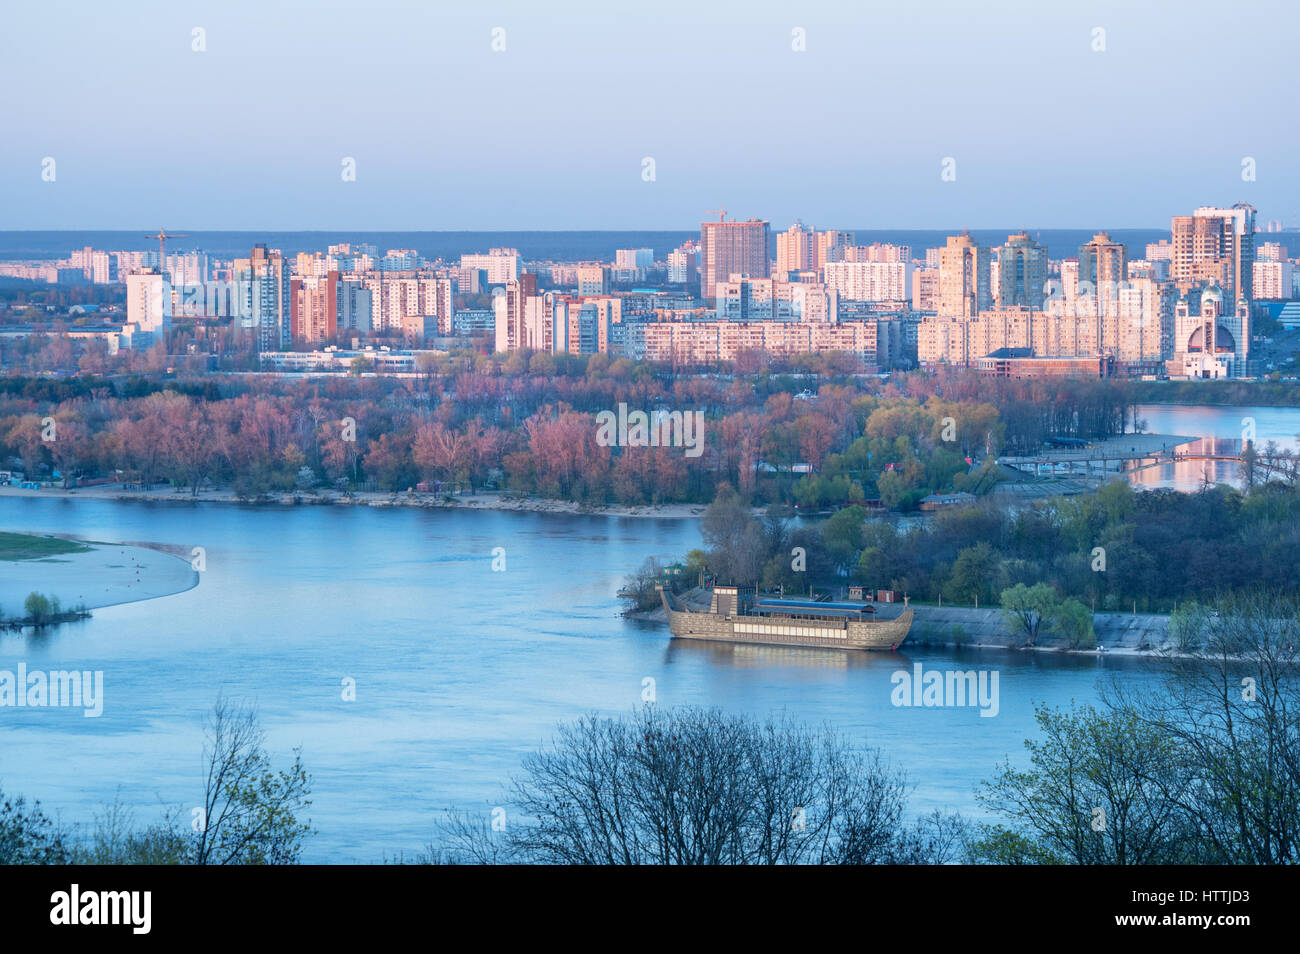 Panoramic view of Expo center and Left bank districts, Kiev, Ukraine Stock Photo